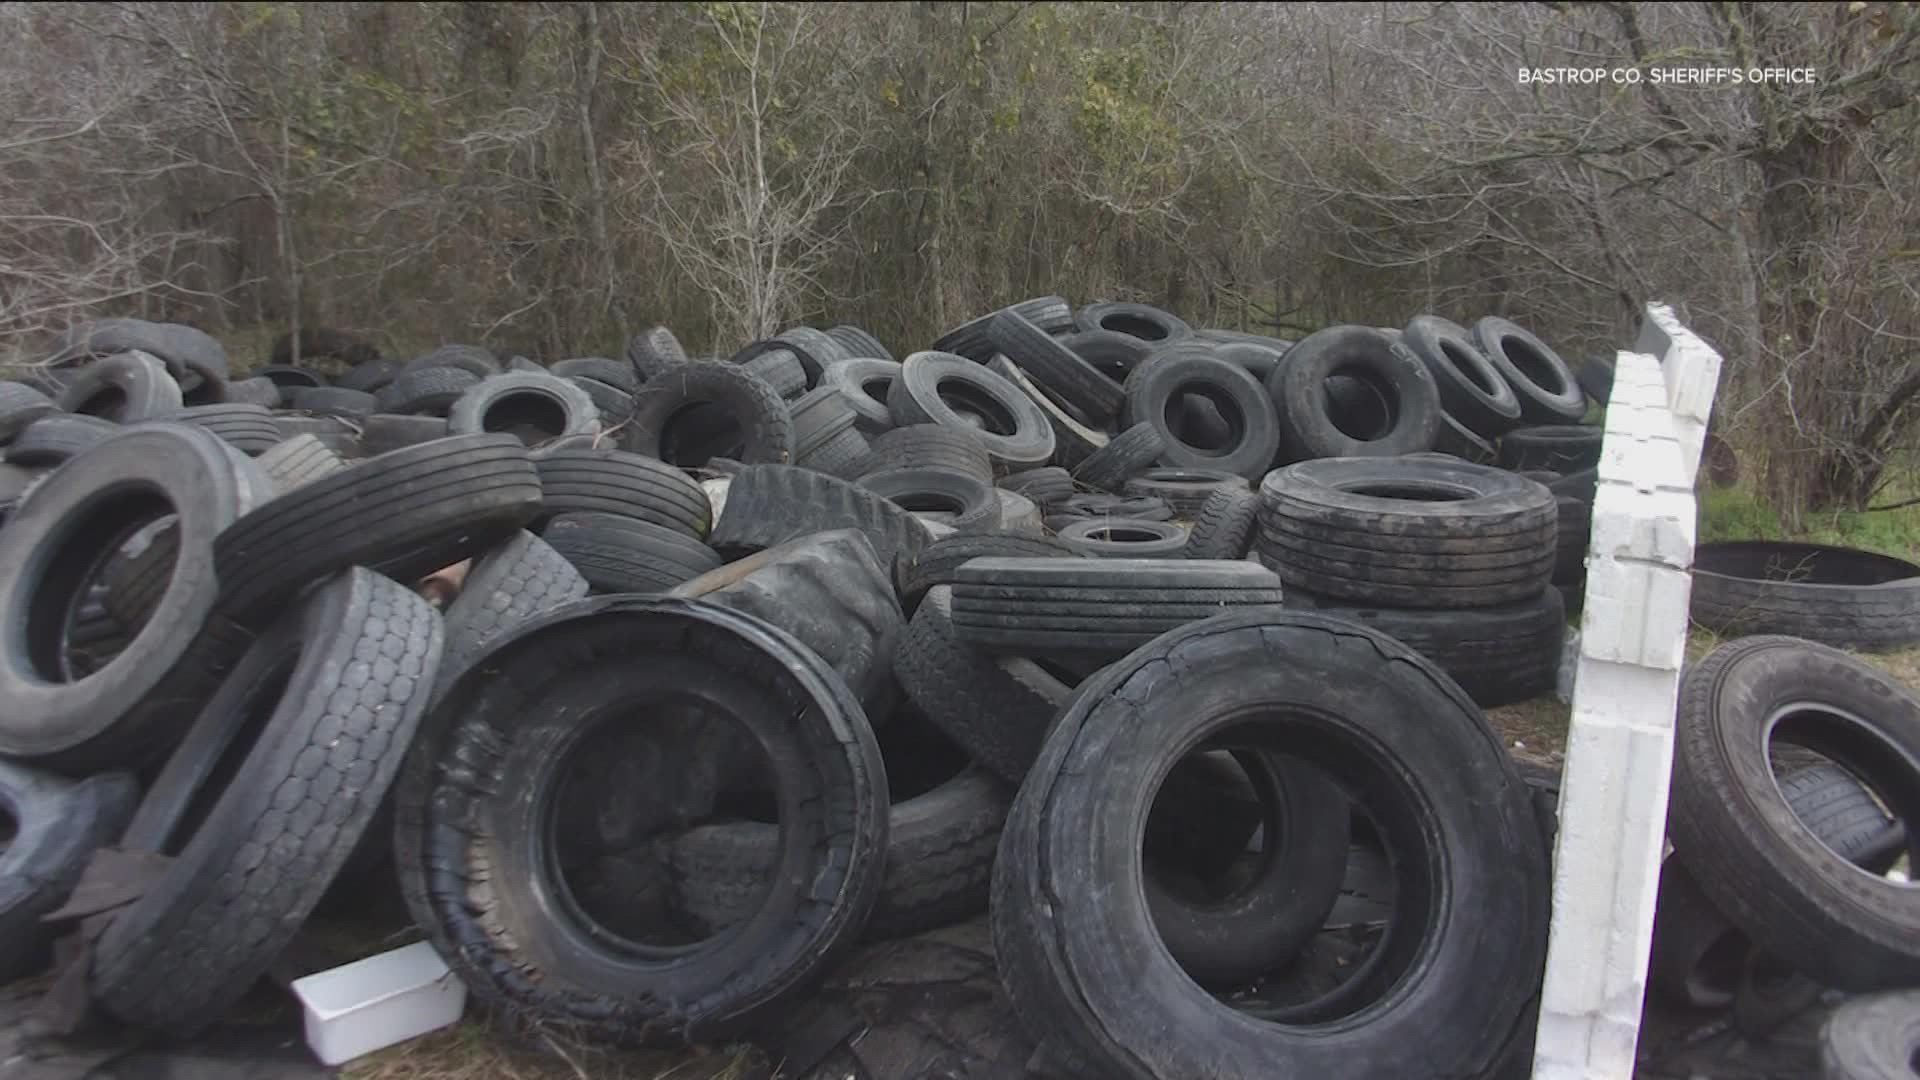 Officials say the two dumped approximately 1,900 pounds of tires on a property without the owner's approval.